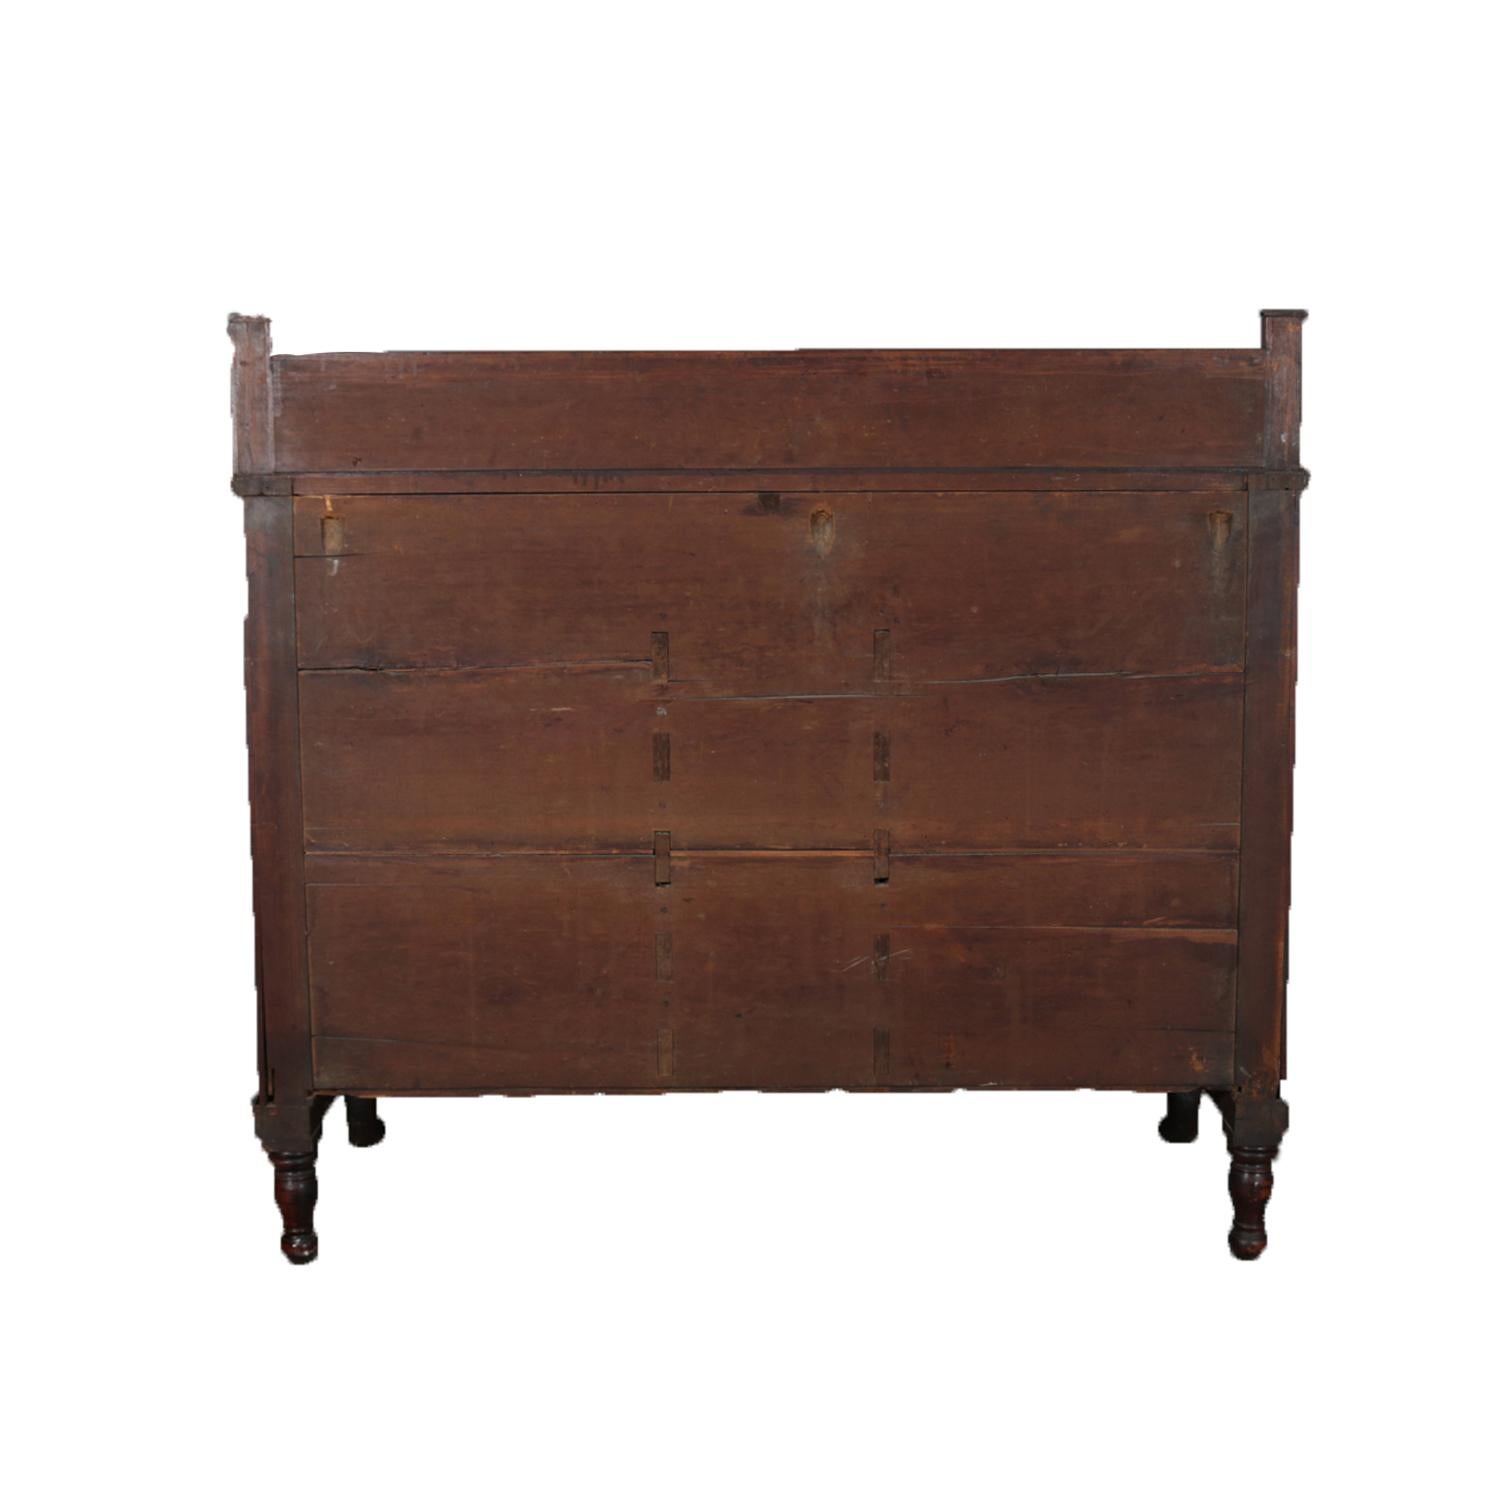 19th Century Antique American Empire Flame Mahogany and Bronze Sideboard, circa 1830